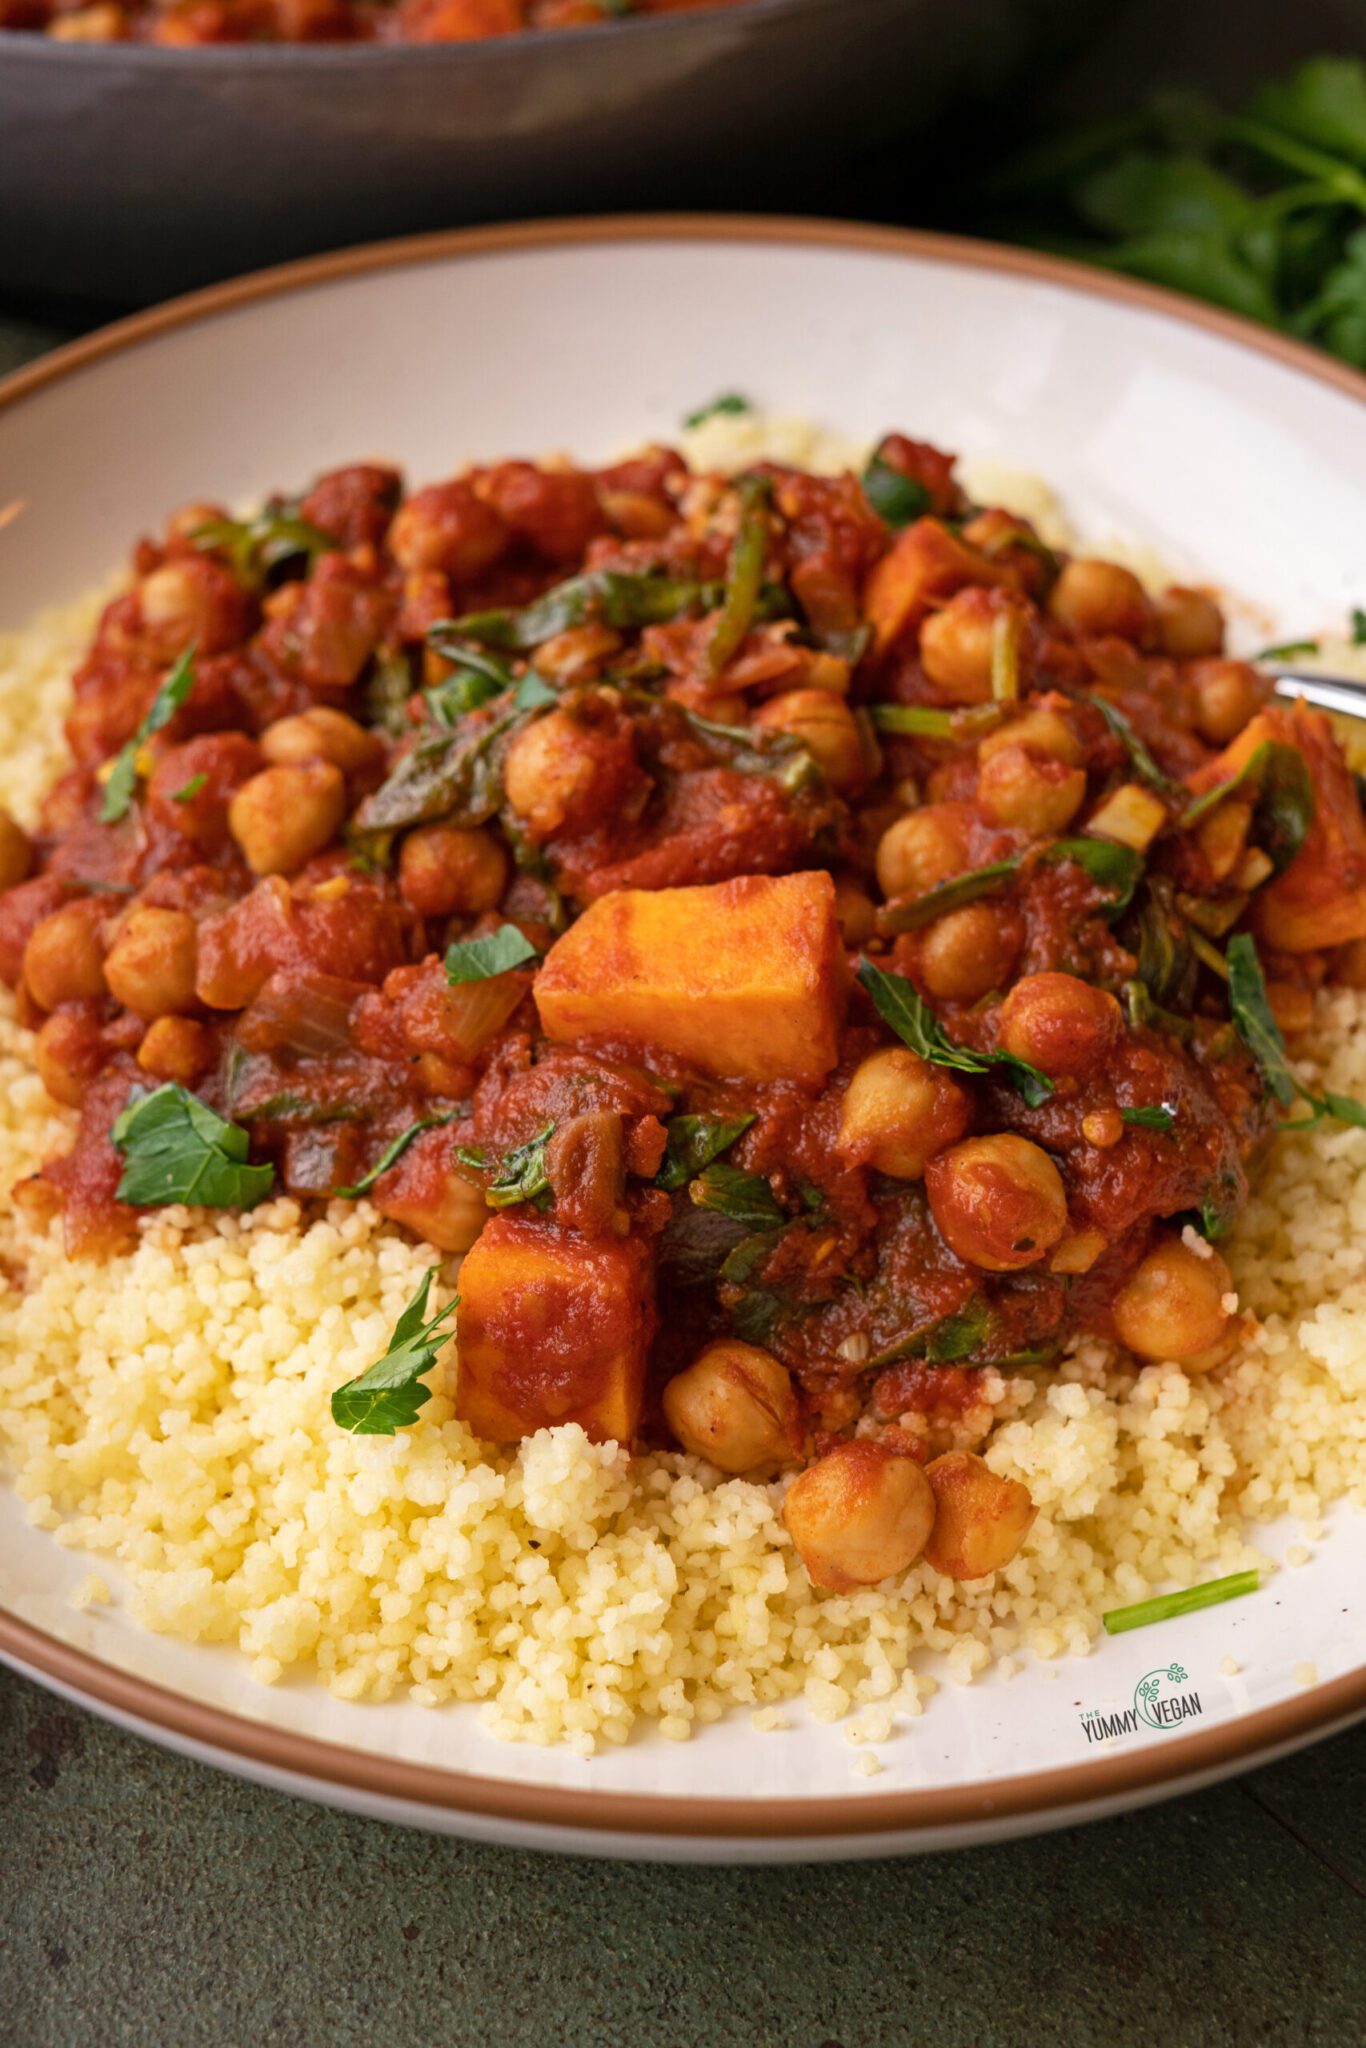 Moroccan Style Chickpea Stew in a bowl